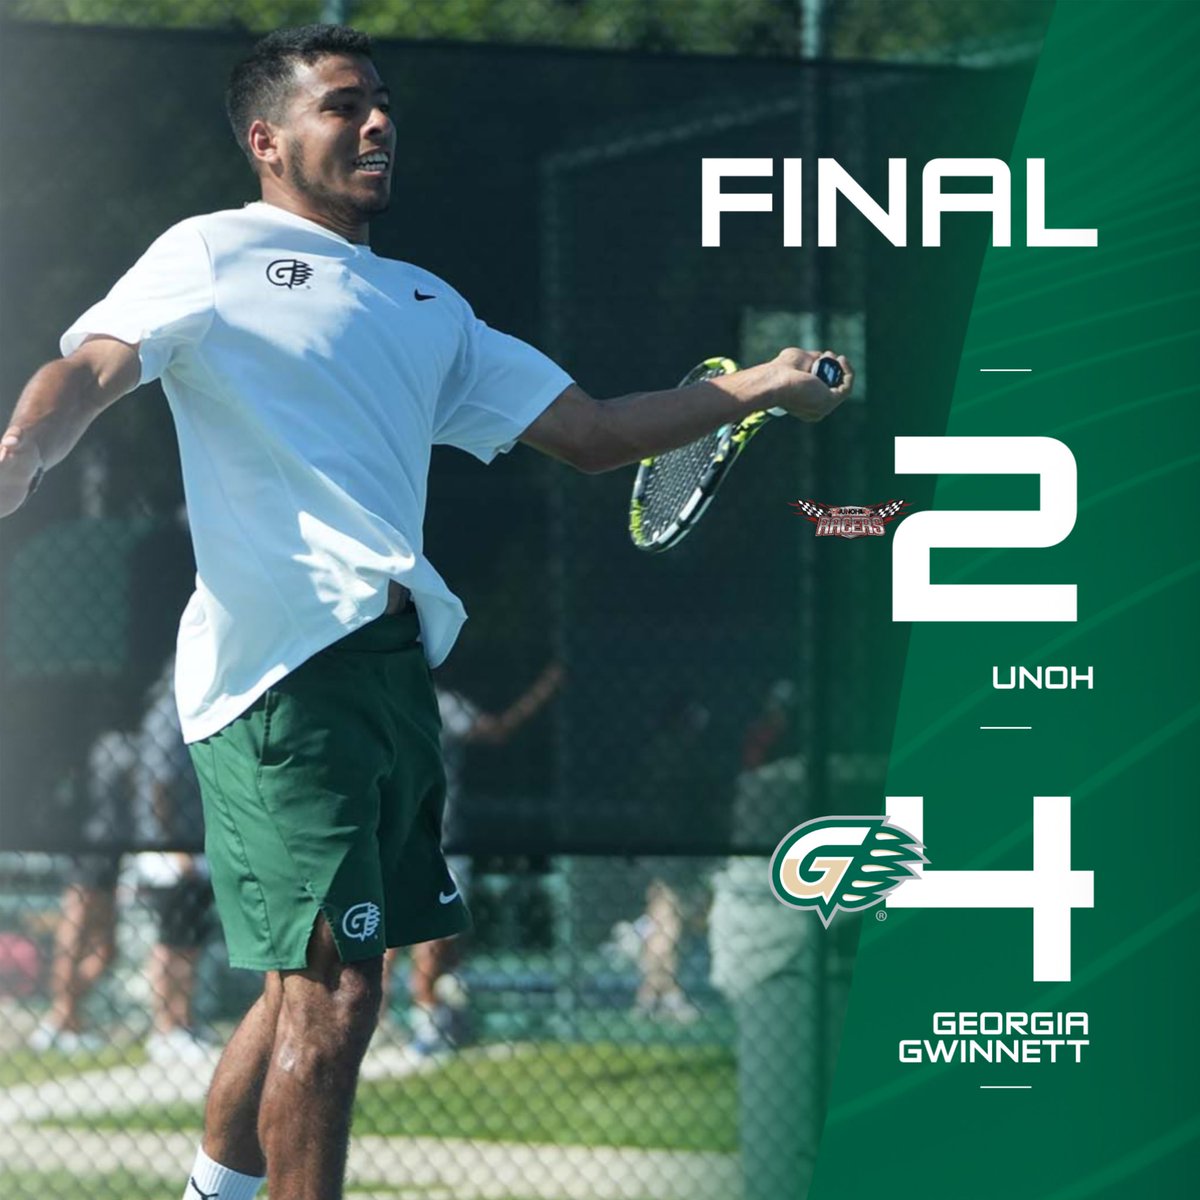 SINGLES RALLY! Luis Francisco Sampedro clinches the match at No. 4 singles as the Grizzlies rally from dropping the doubles point. Santiago Villarruel gave the Grizzlies a 3-2 lead with a win at No. 5 singles. Grizzlies advance to NAIA National Championship match. #GGCAthletics